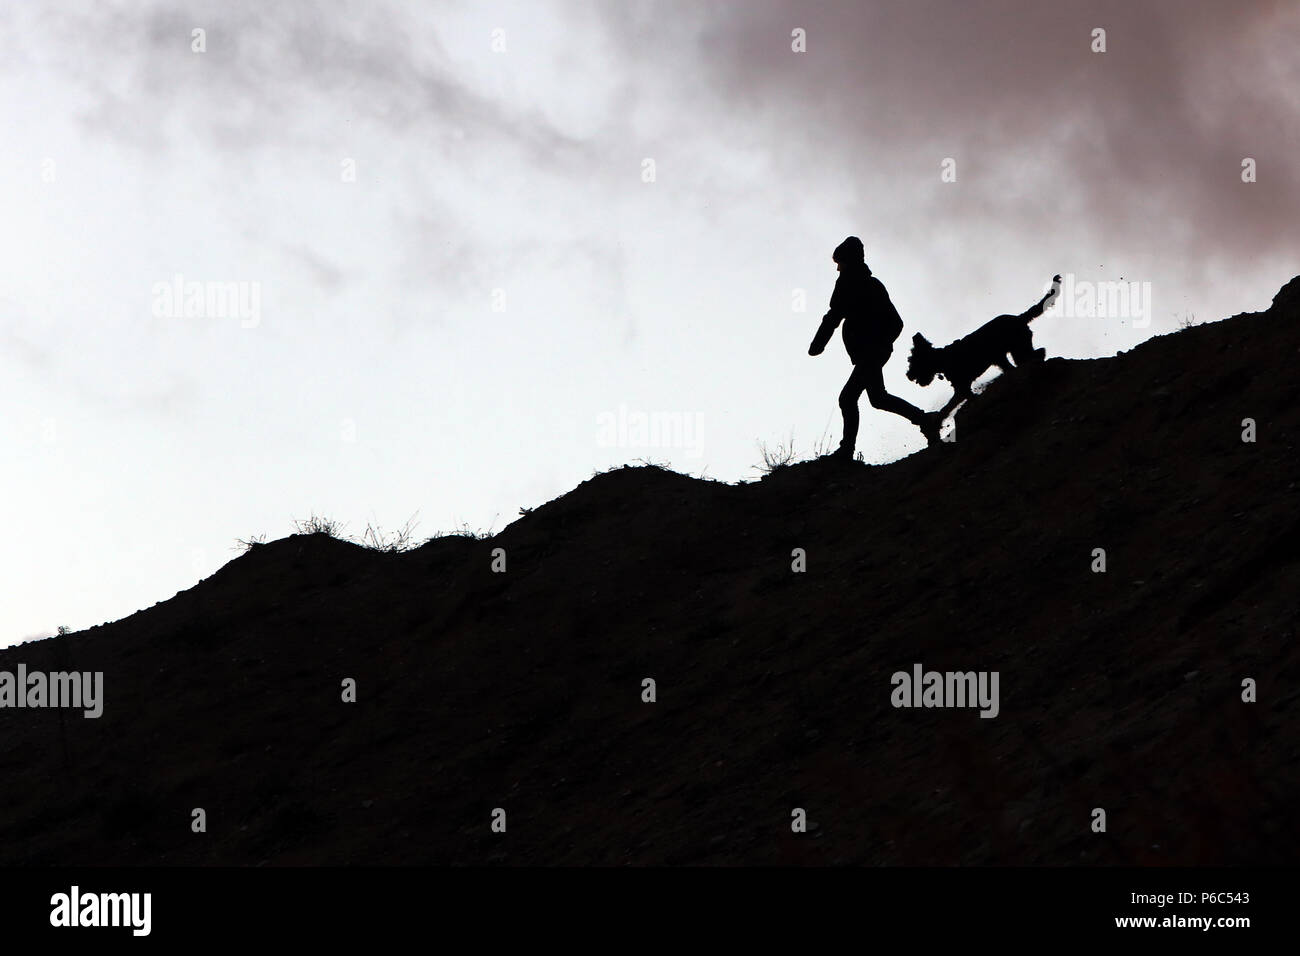 Wustrow, Germany - silhouette, boy walks with his dog over a dune in the evening Stock Photo